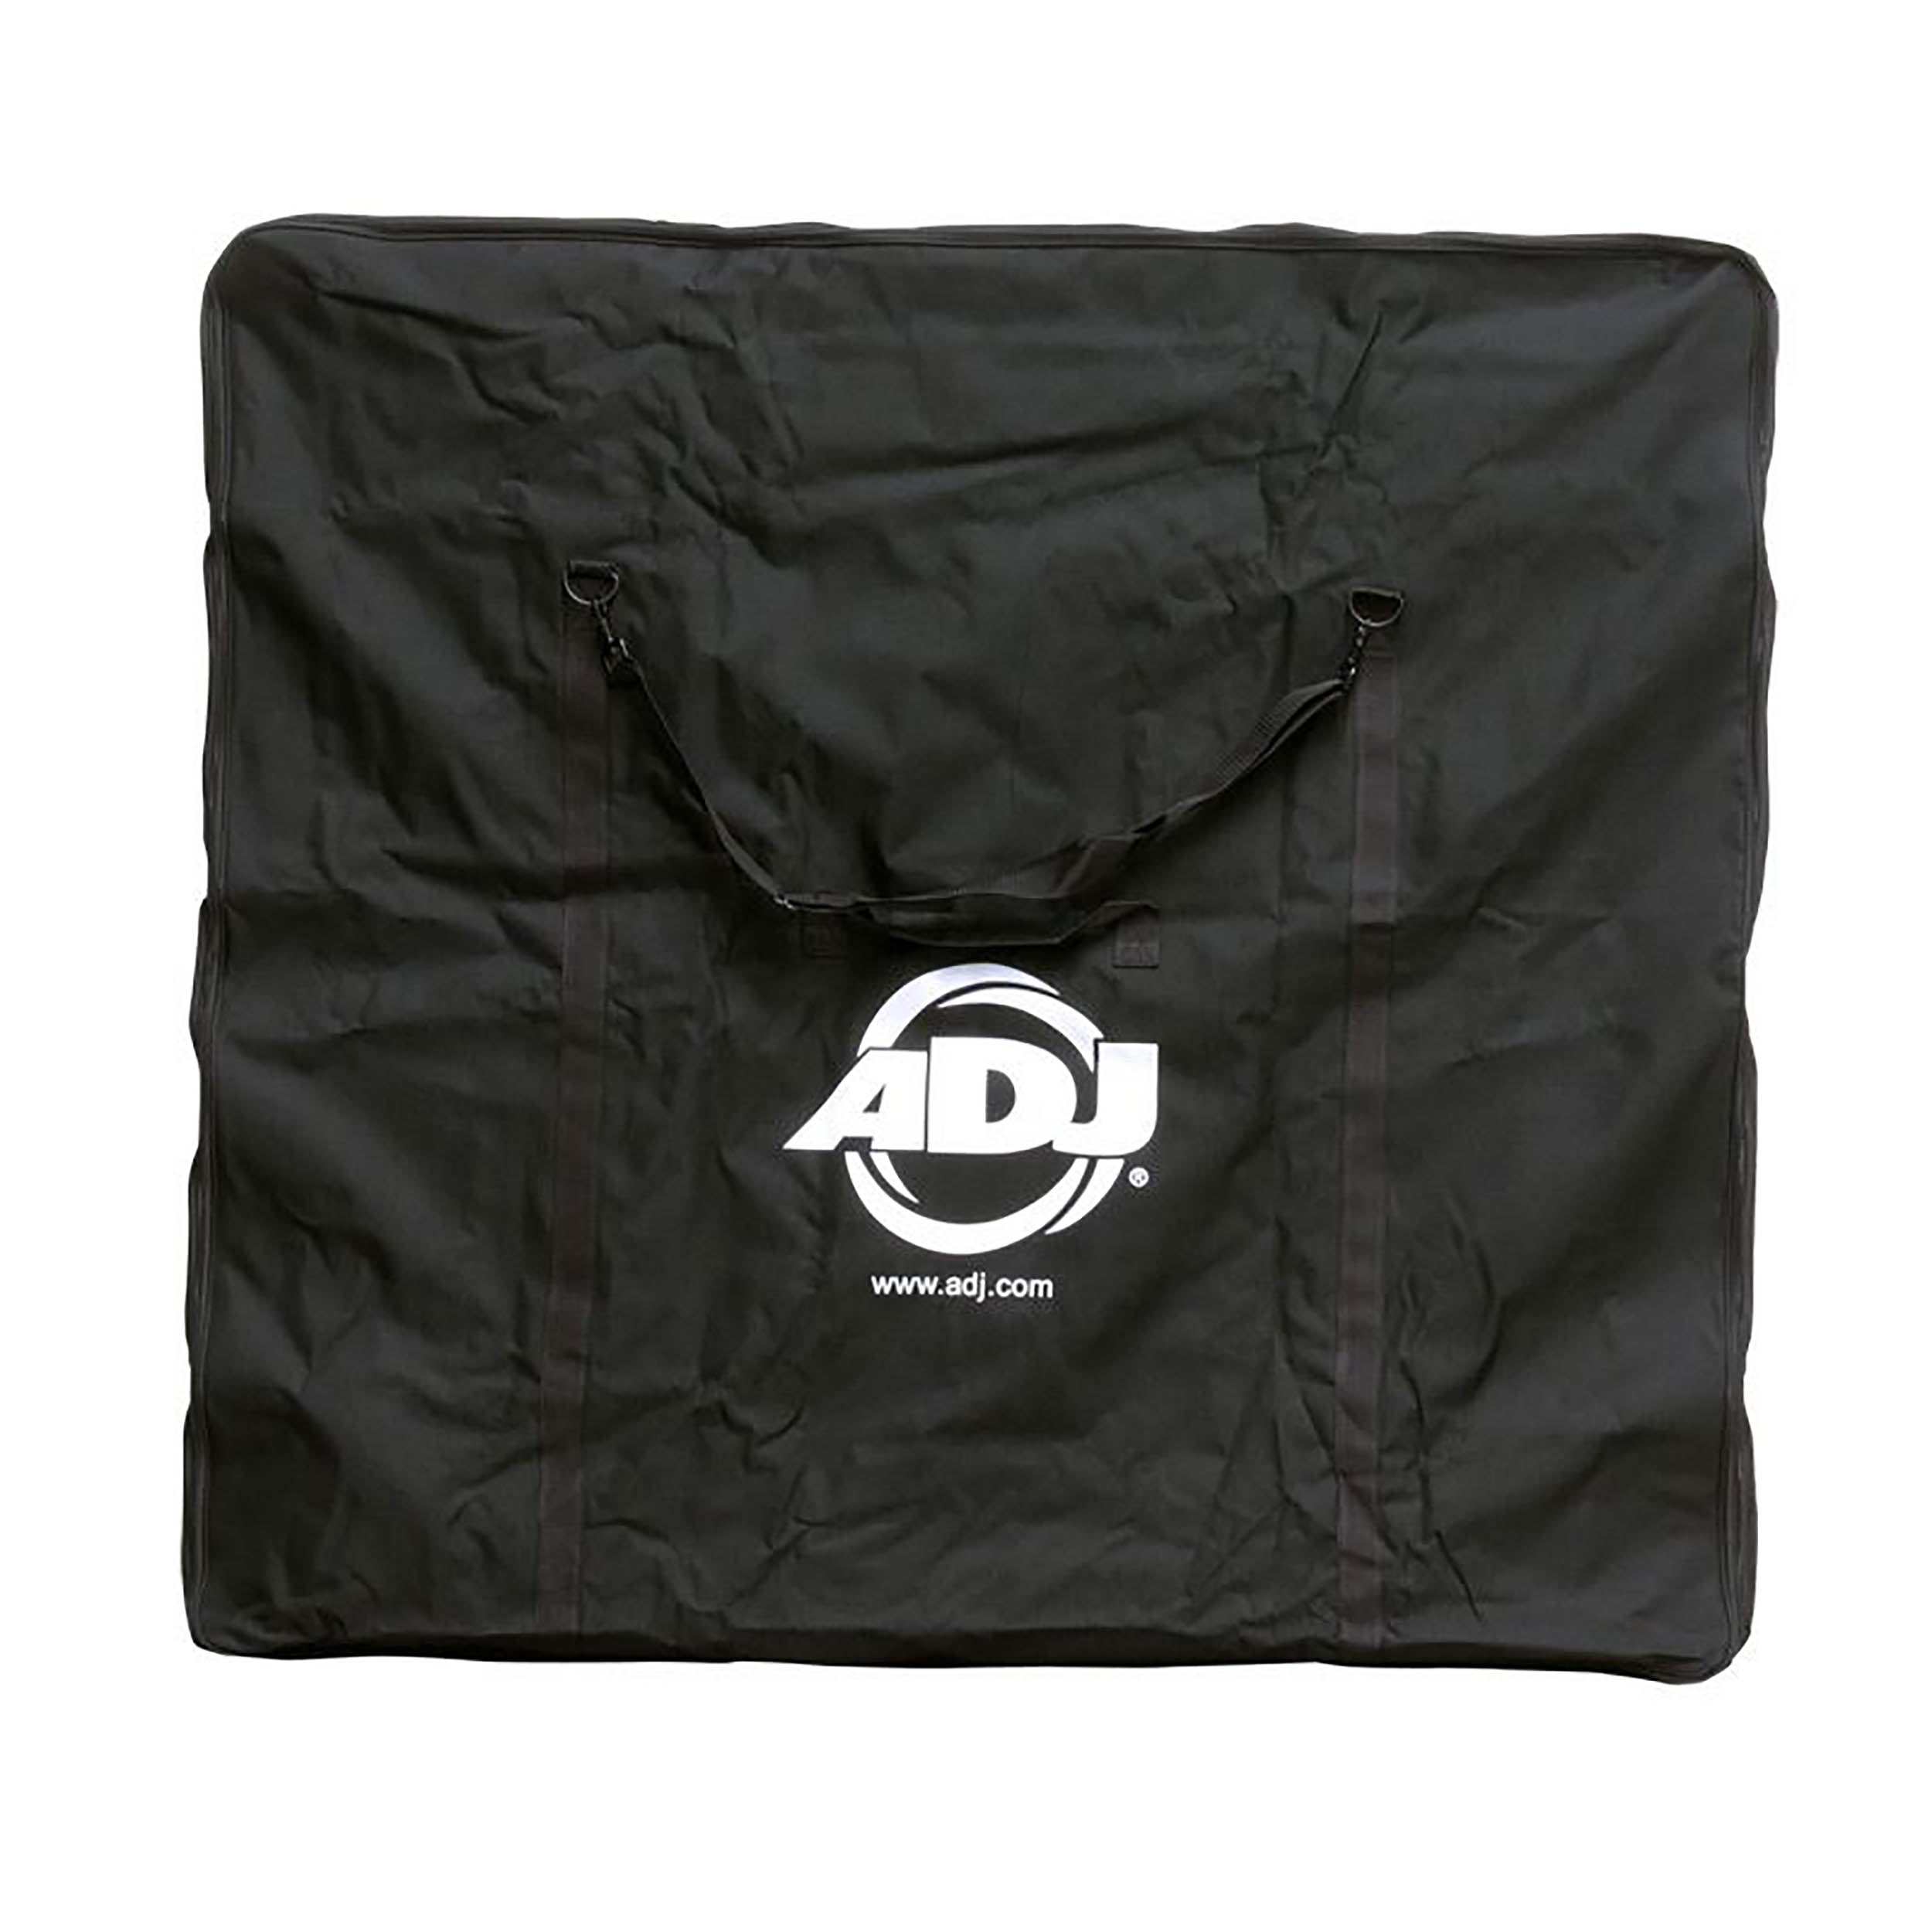 ADJ PRO-ETB, Black Carrying Bag for Pro Event Table. by ADJ